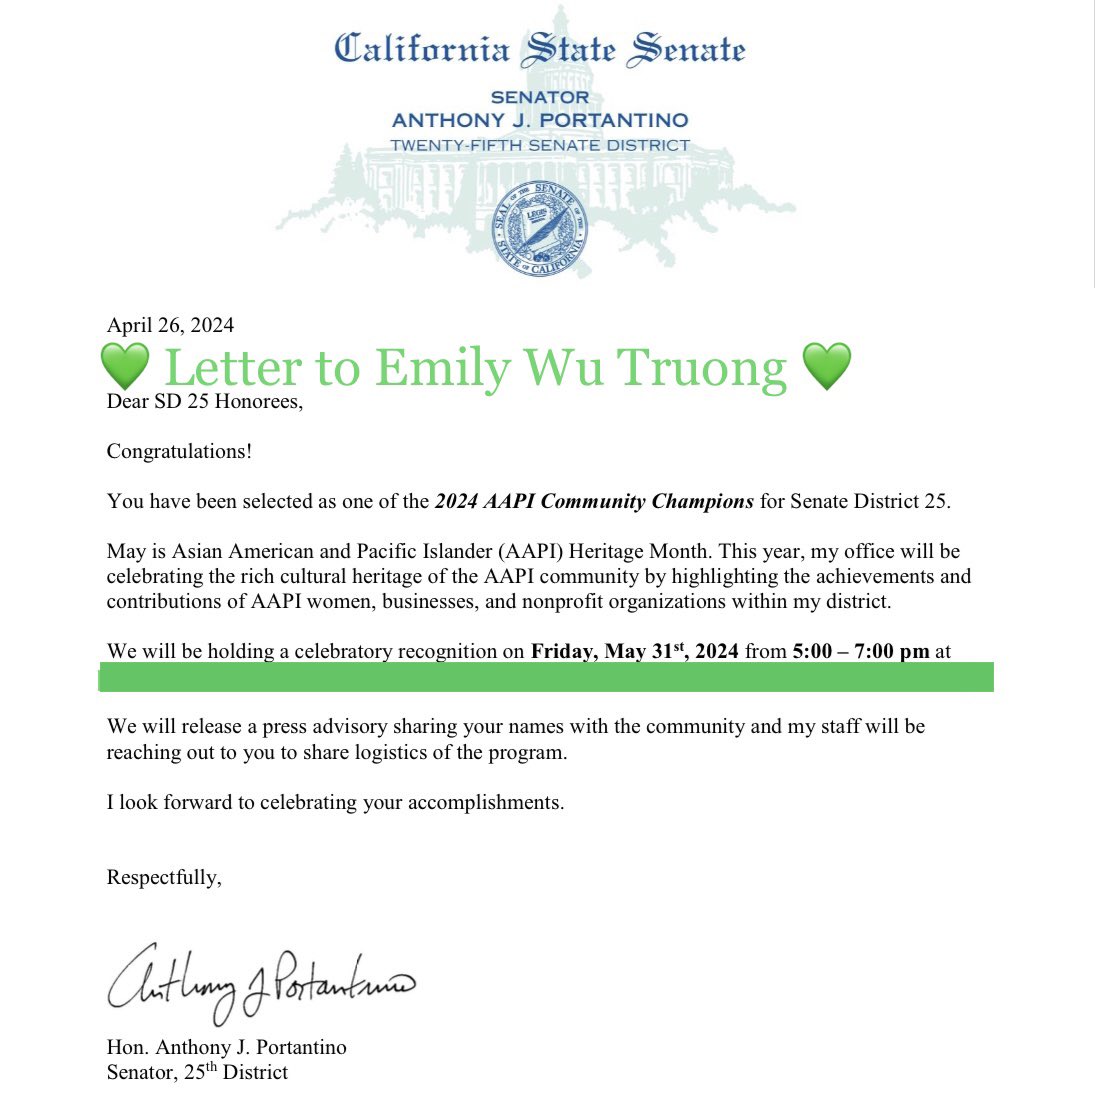 #TimeFlies. I can’t believe it’s already been 9 months since I was hospitalized against my will. It’s also been a year & 8 mths since my Dad died. Then I’m receiving this award from @Portantino’s office soon! I’ve been named 2024 AAPI Community Champion! What an honor! 💚♥️💚